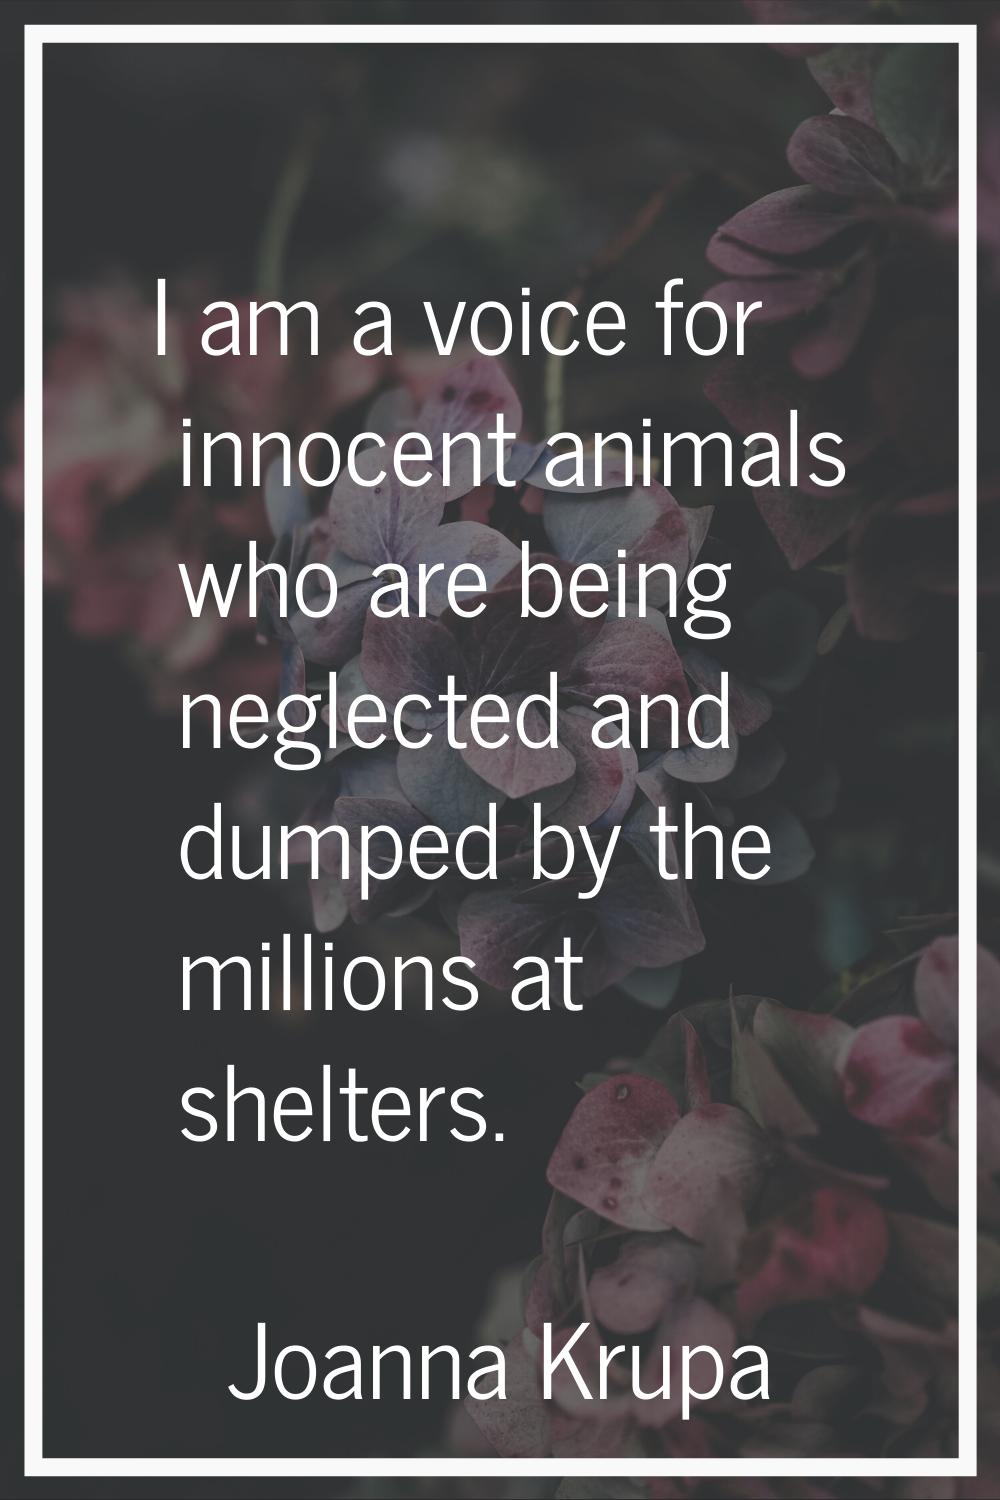 I am a voice for innocent animals who are being neglected and dumped by the millions at shelters.